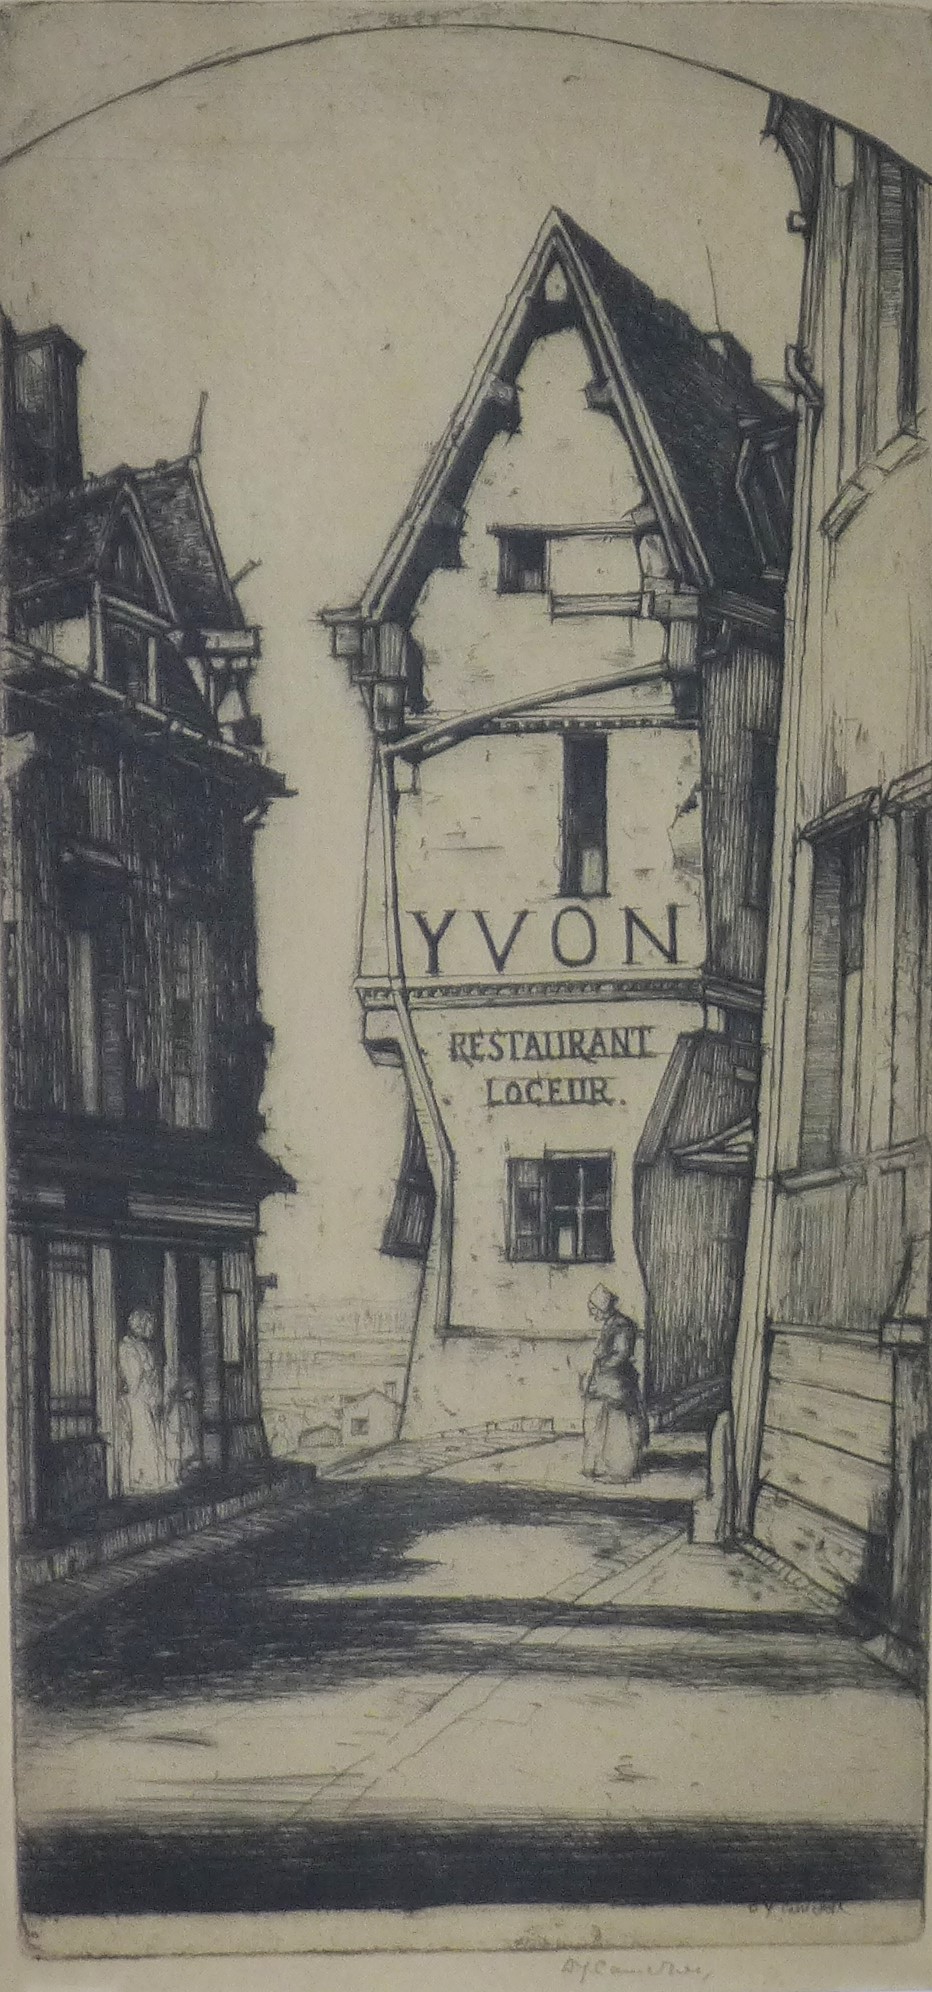 DY Cameron, Yvon Restaurant, etching, signed in pencil, framed under glass, 13 x 28cm